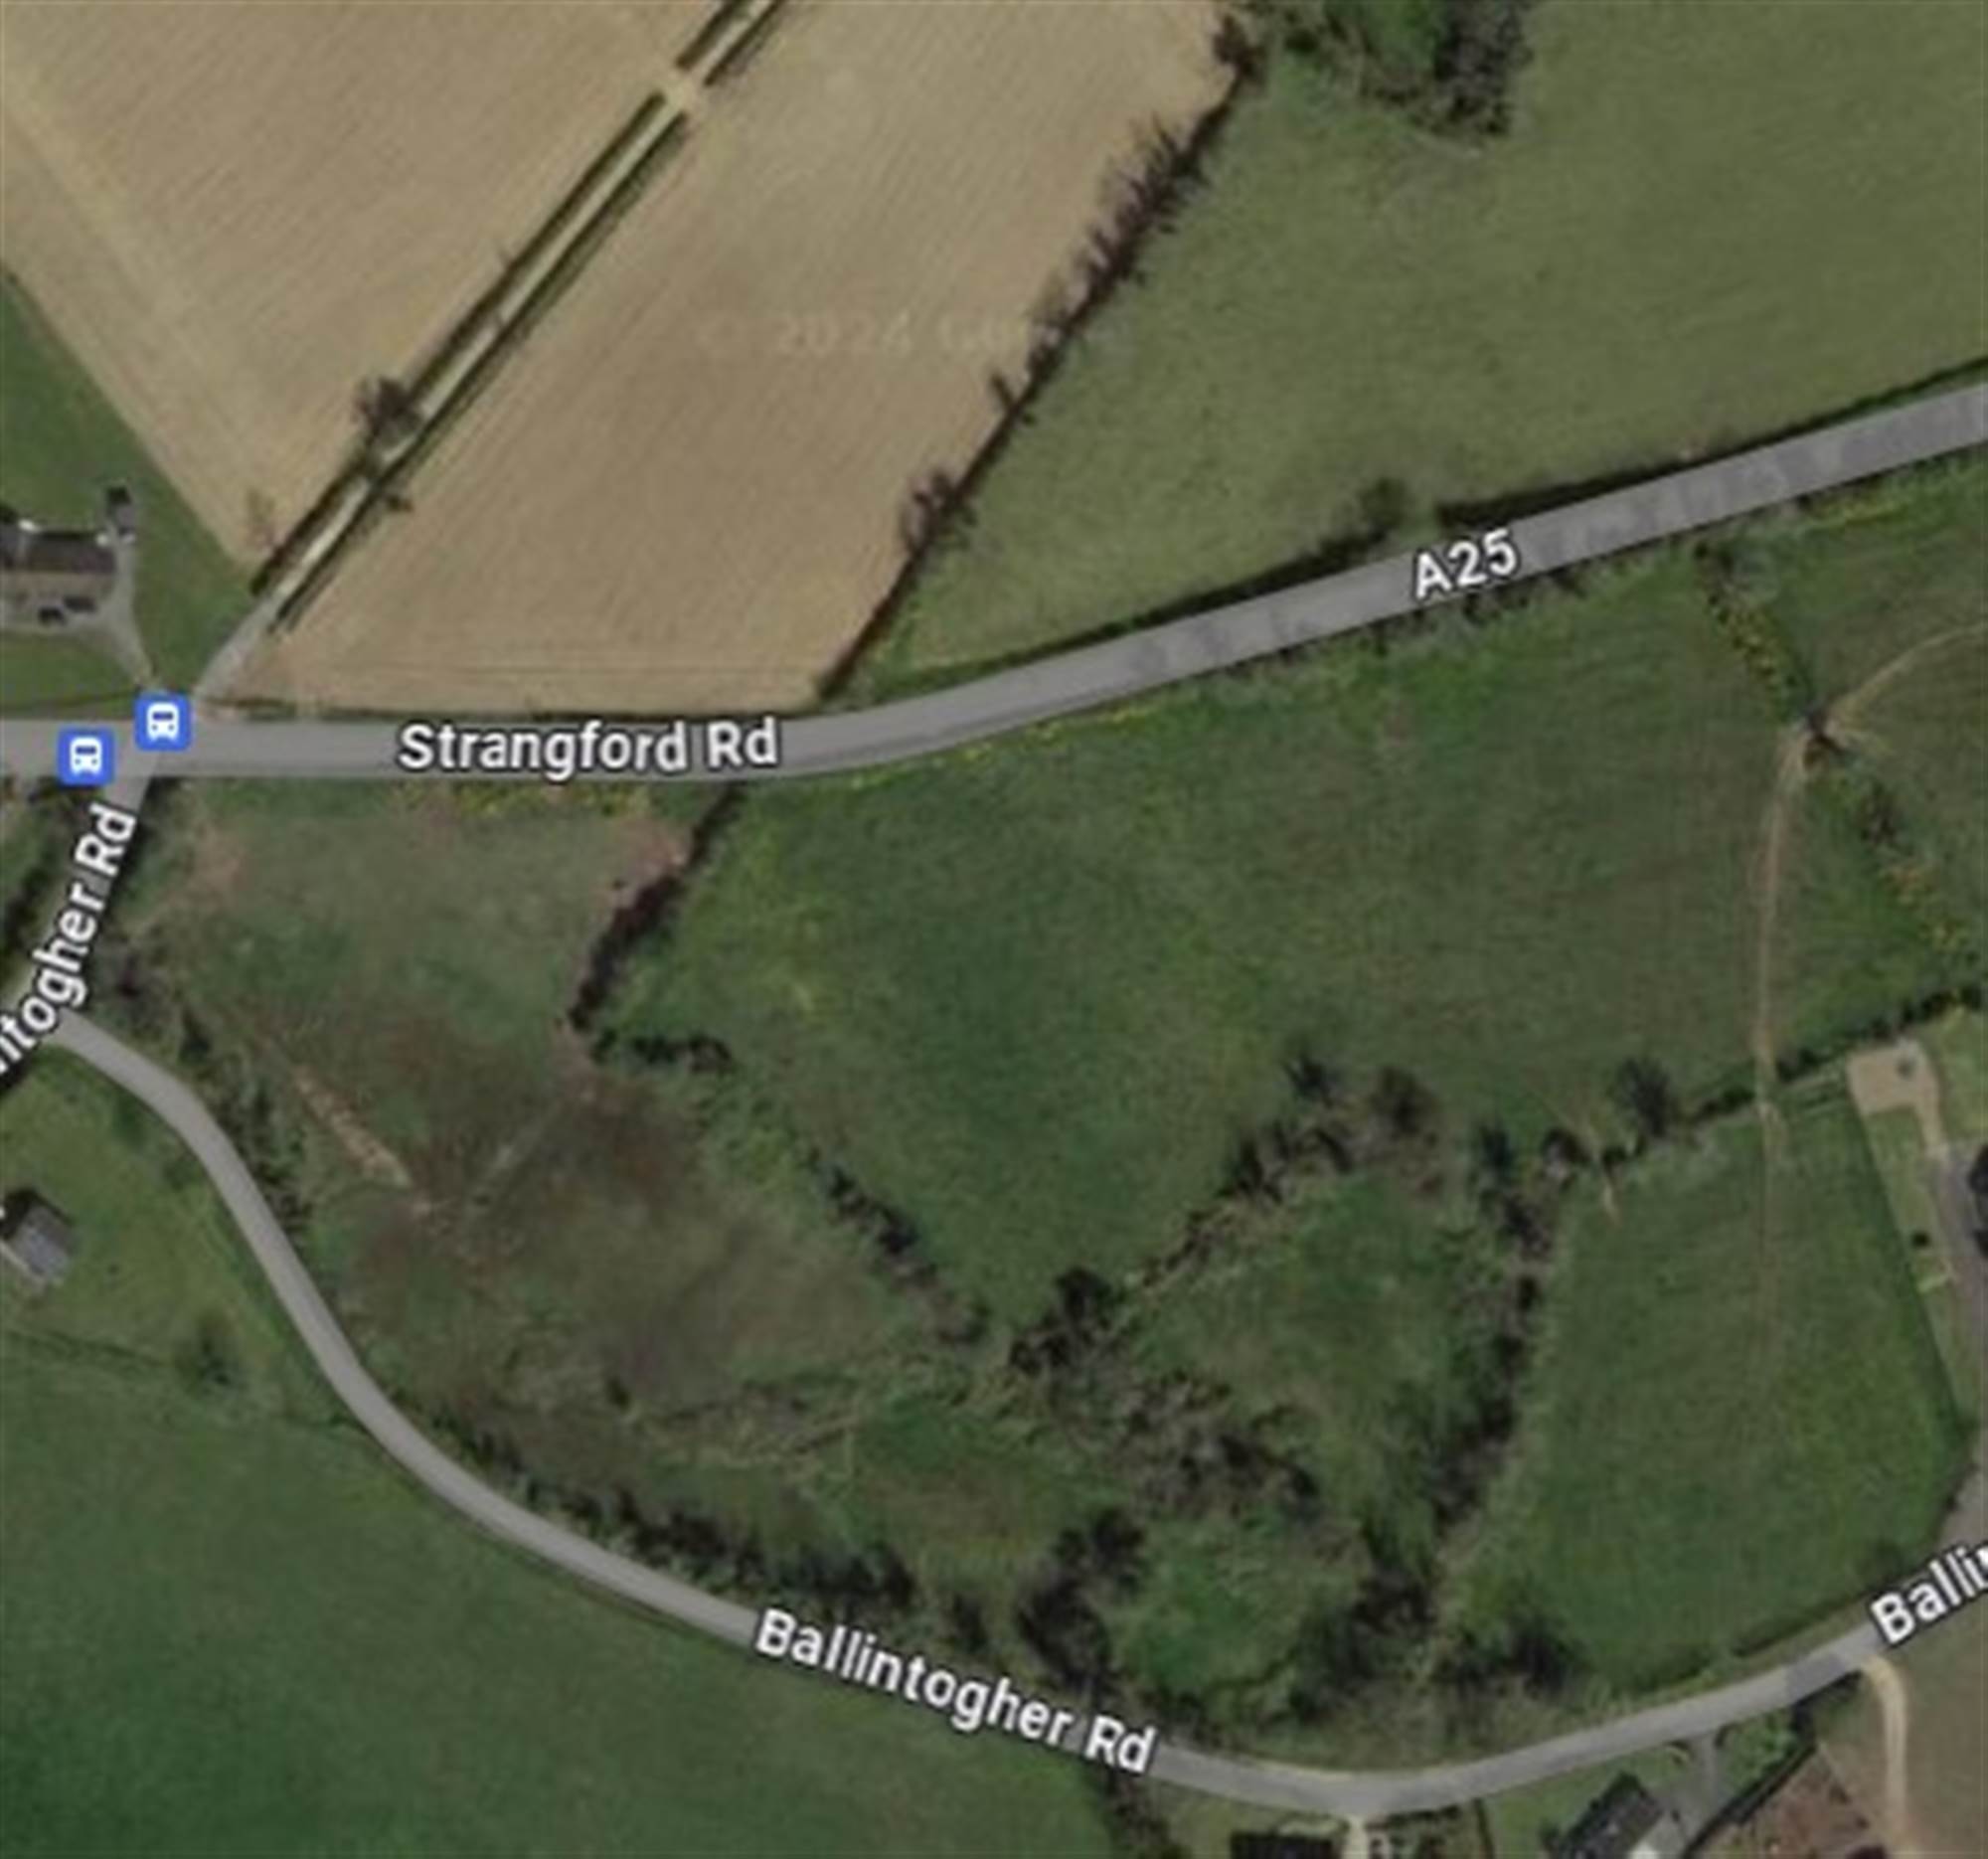 2.7 acres of land off Strangford Road and Ballintogher Road